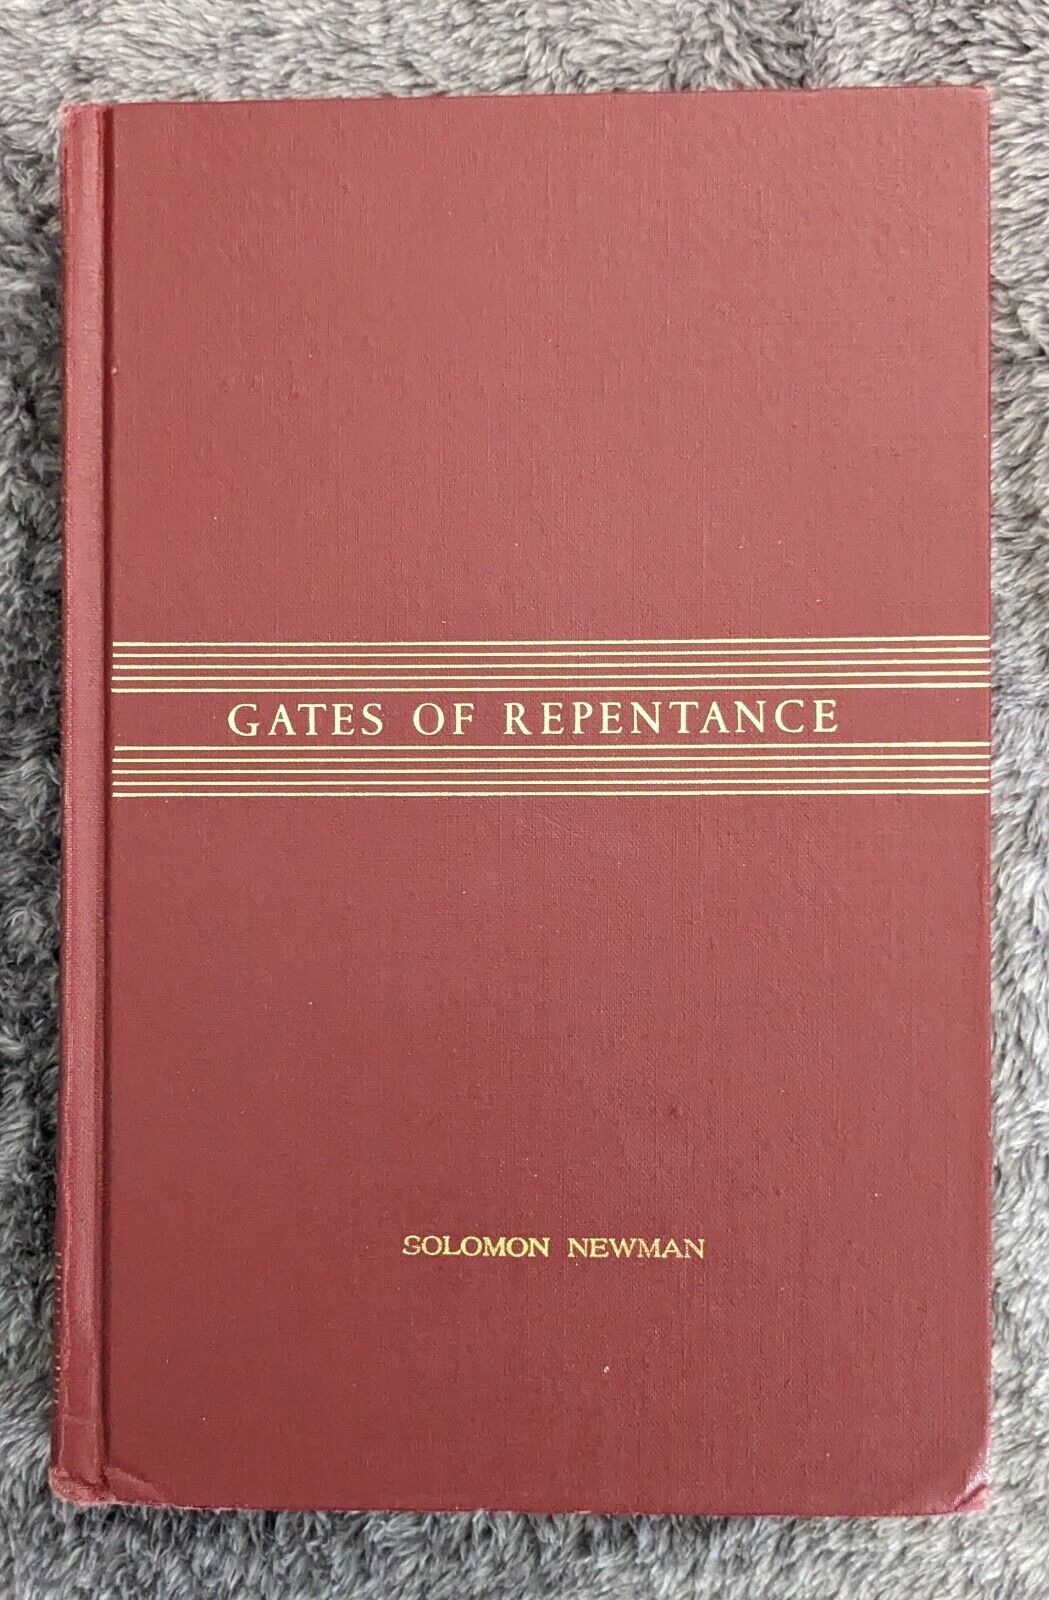 Lot Of 2 Gates Of Repentance THE NEW UNION PRAYER BOOK 1978 Hardcover